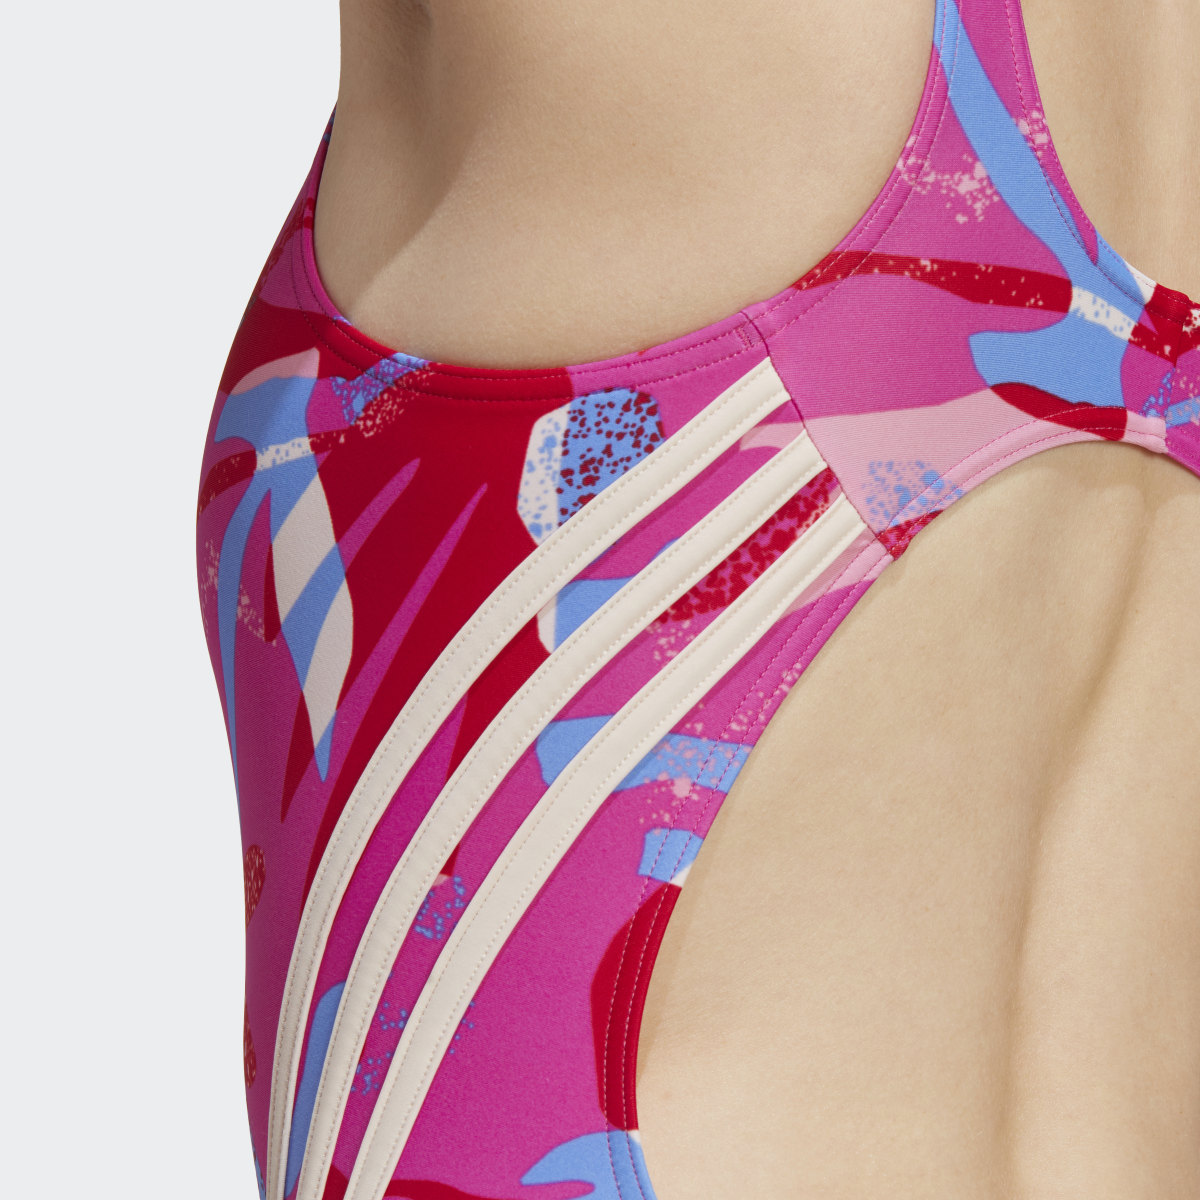 Adidas Floral 3-Stripes Swimsuit. 9